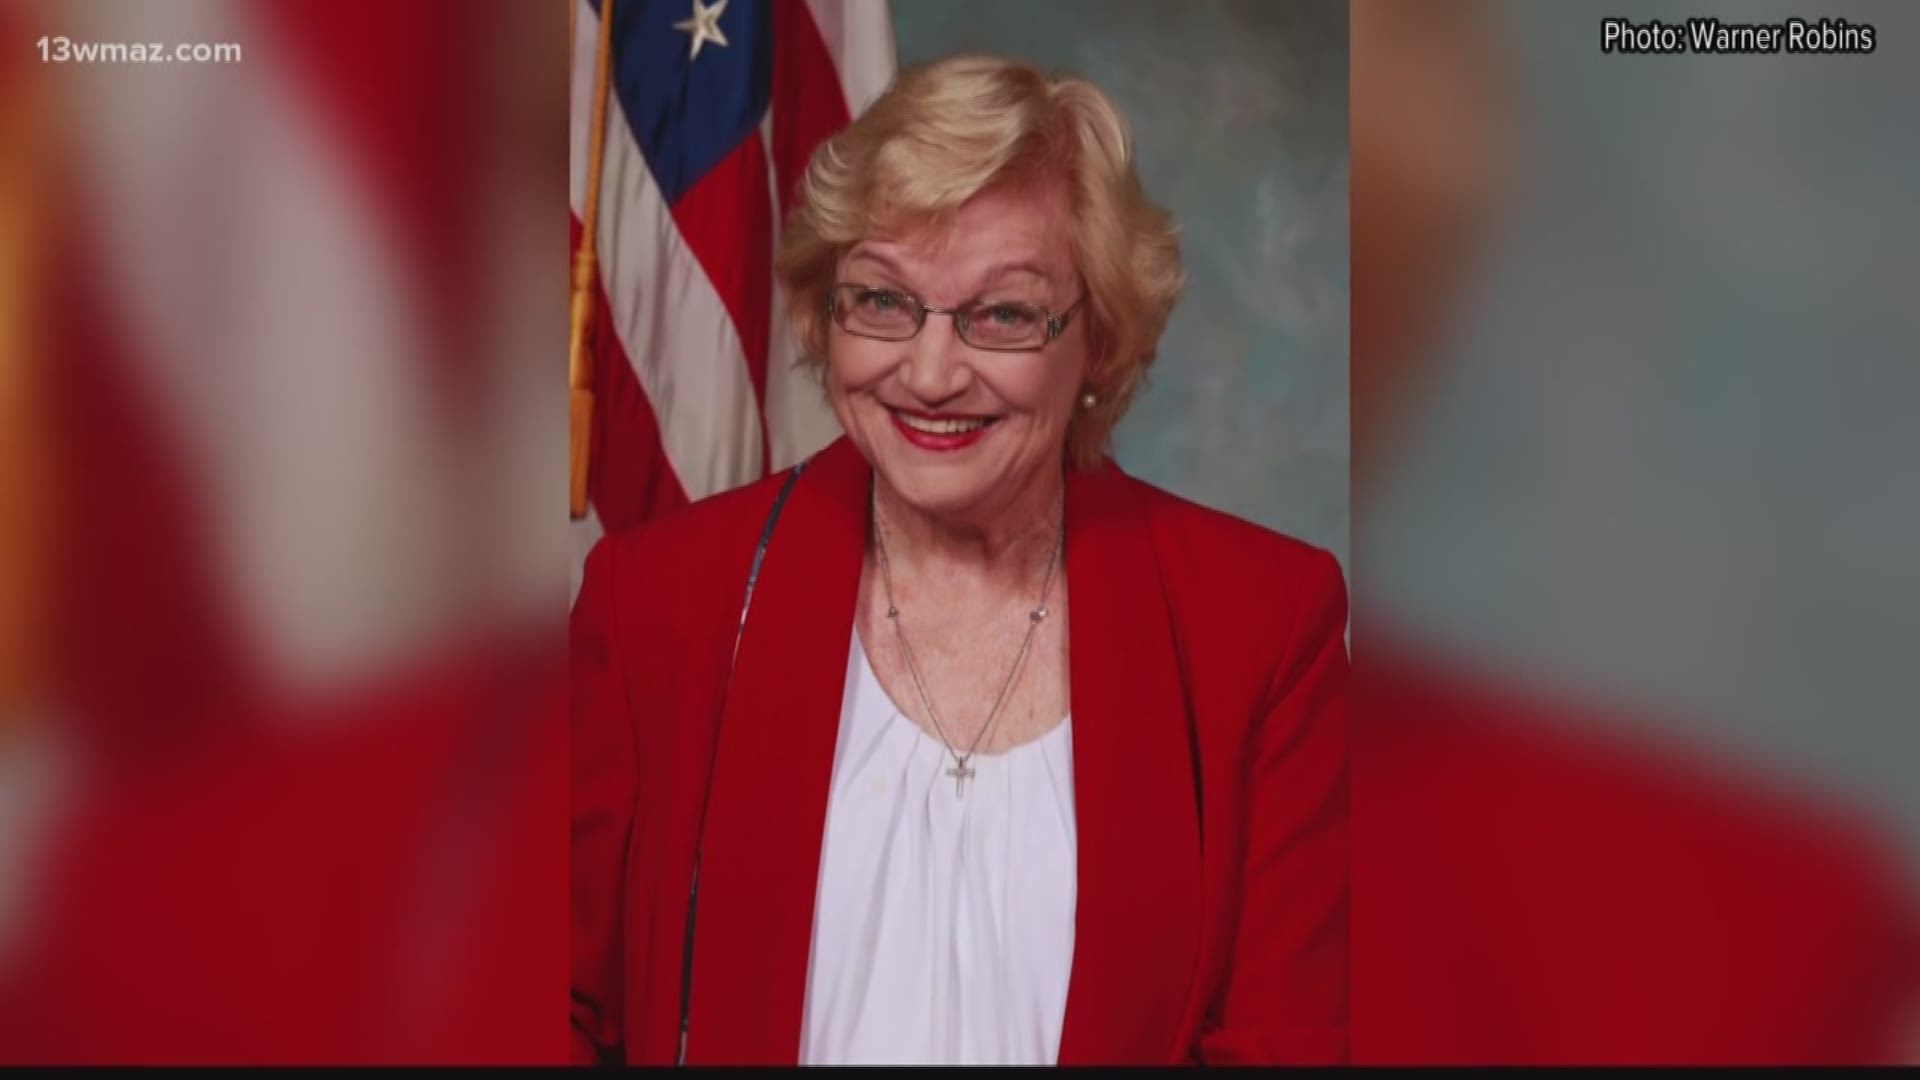 Warner Robins is mourning Carolyn Robbins, longtime member of Warner Robins City Government. She died on Monday.